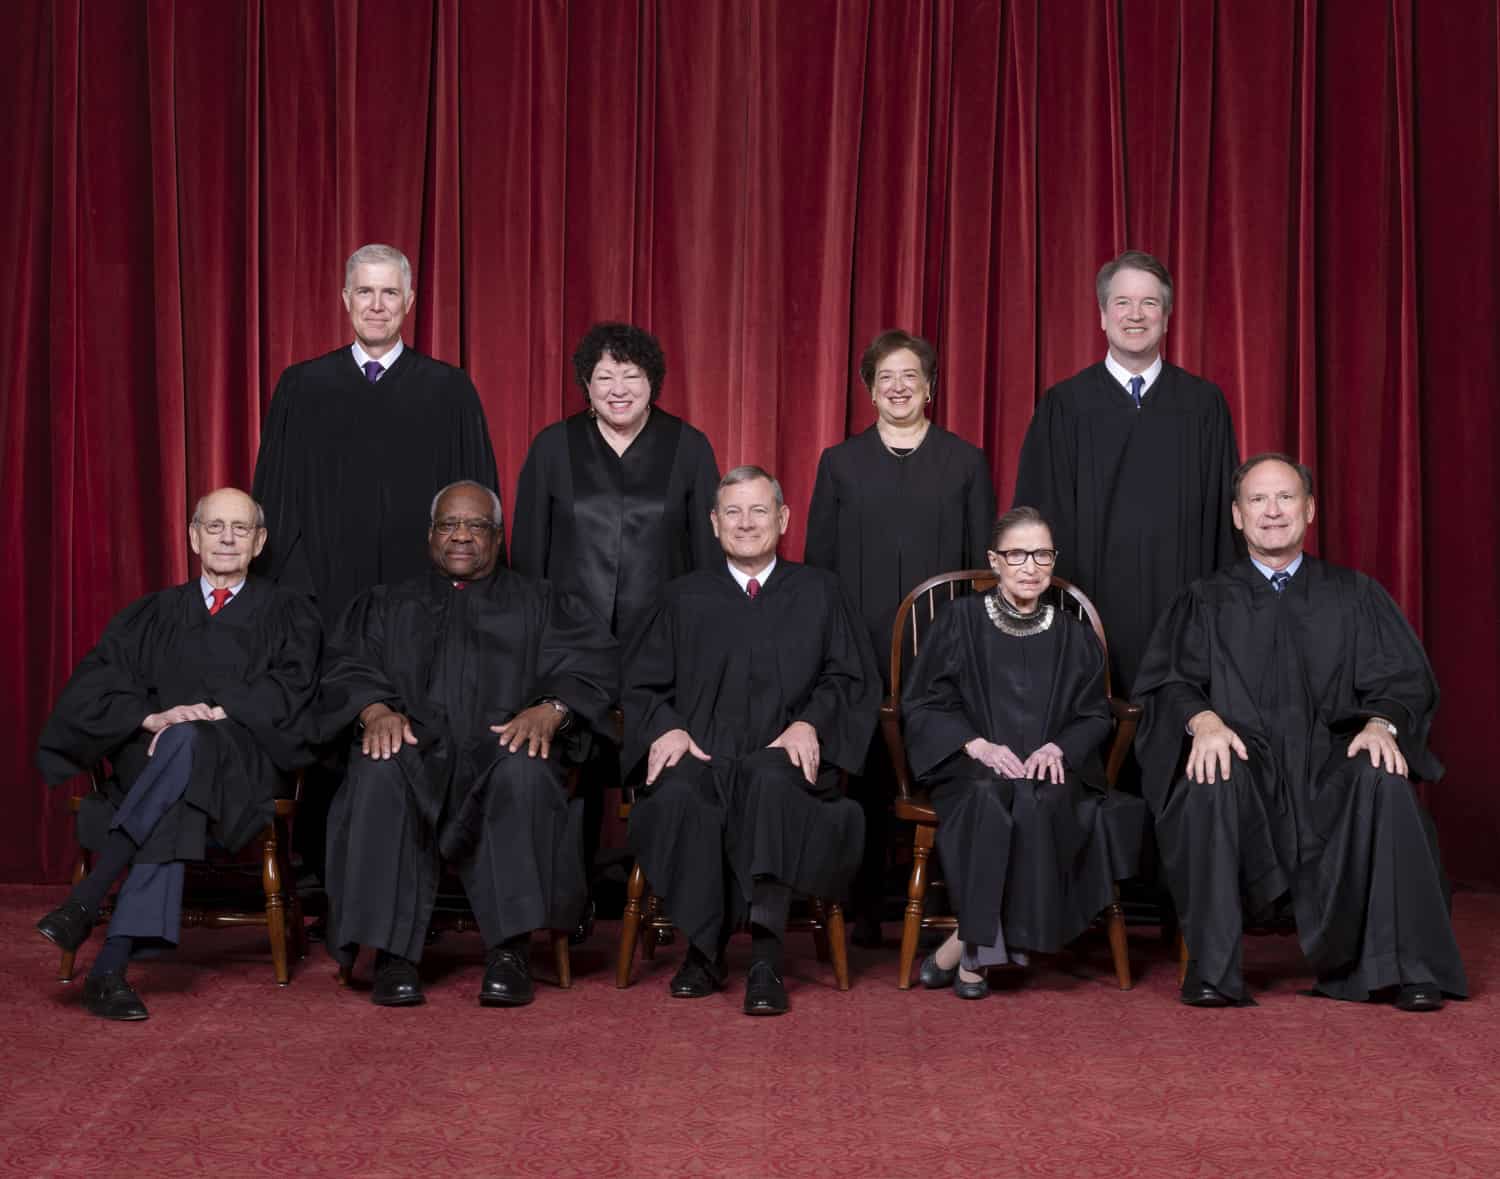 A Prayer for the Supreme Court